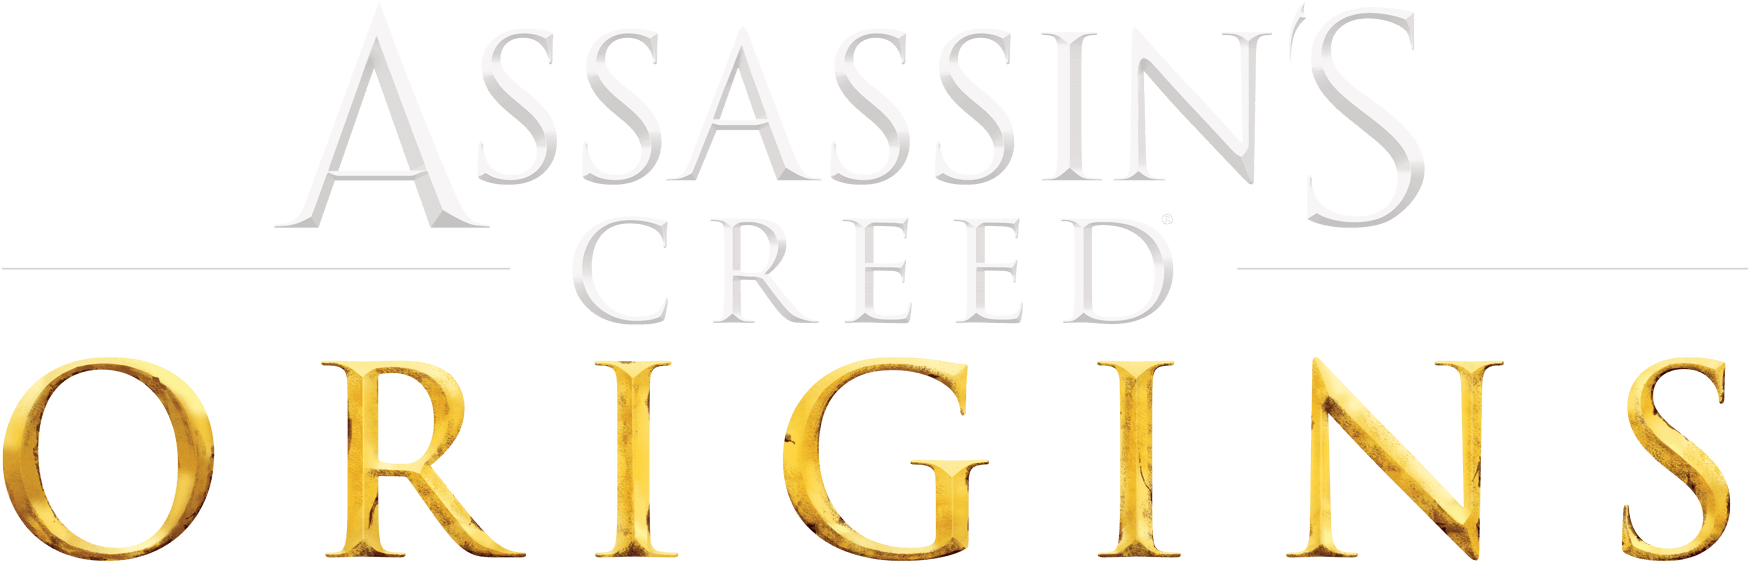 Assassin's Creed Origins - Creed Origins Assassin's Creed Books (1920x761), Png Download